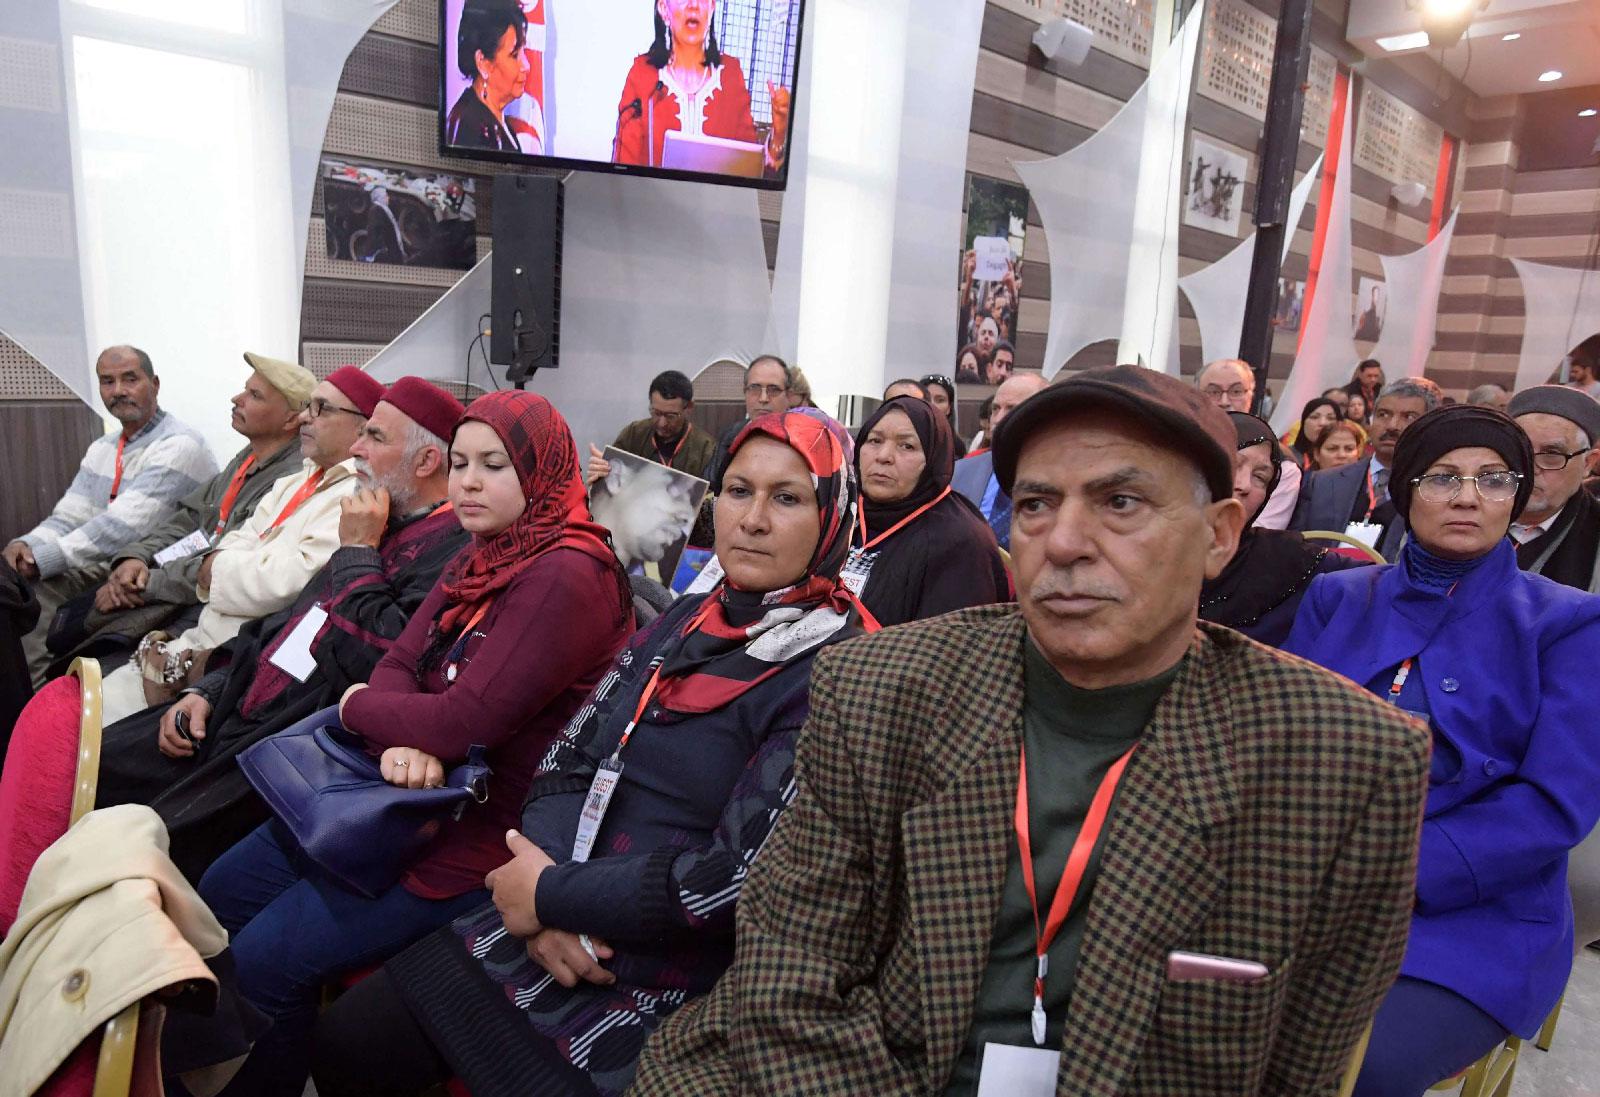 Relatives of Tunisian victims attend the closing conference of the Truth and Dignity Commission (TDC) in the capital Tunis on December 14, 2018.